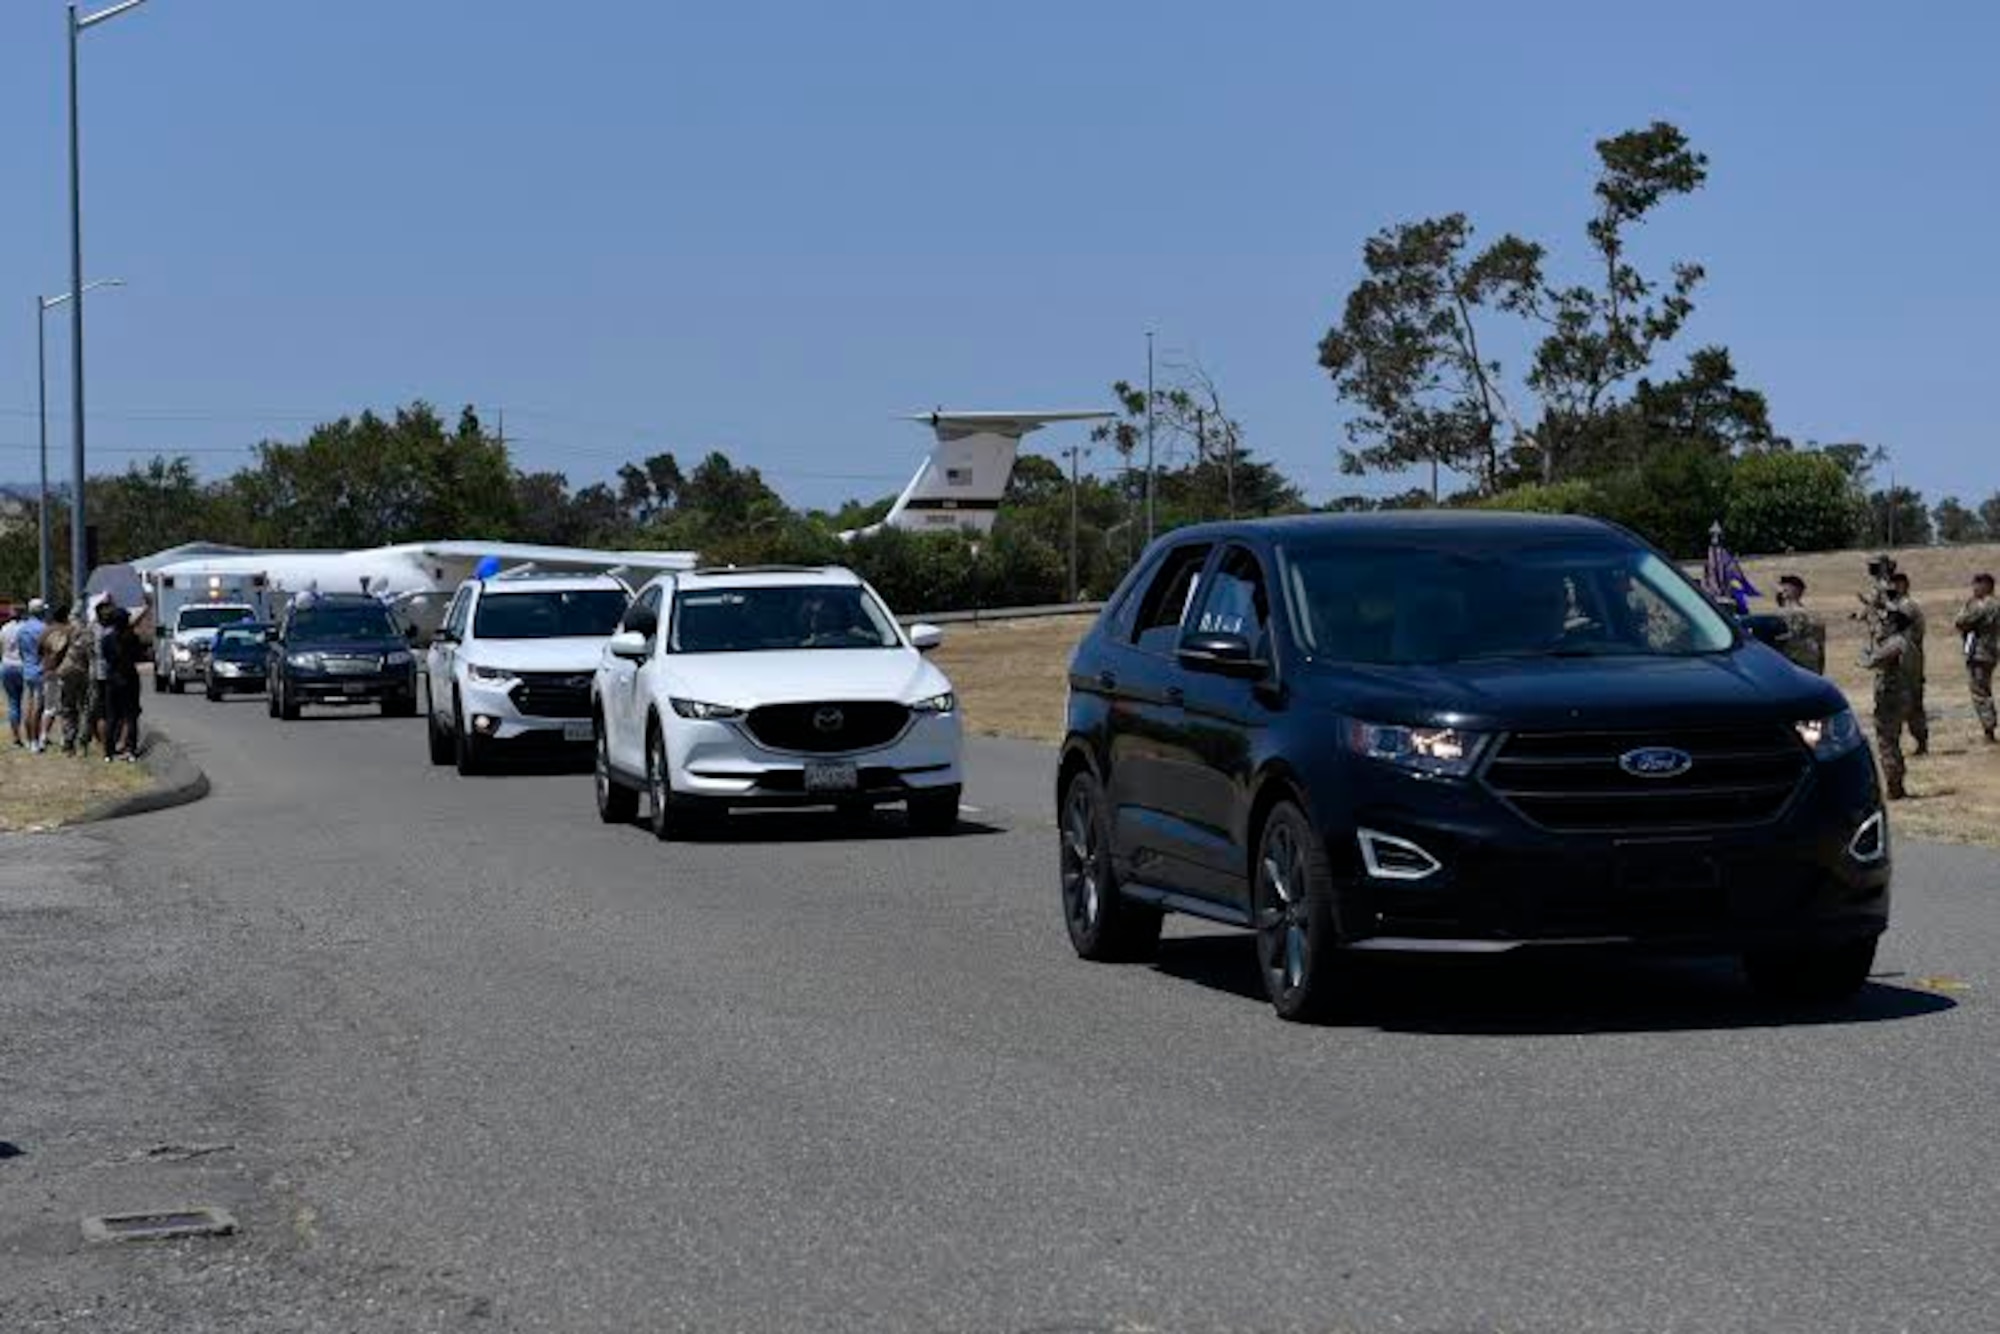 Master sergeant selects drive their cars in a parade during a promotion celebration July 23, 2020, at Travis Air Force Base, California. Travis AFB Airmen selected for promotion to master sergeant celebrated by participating in a parade in order to adhere to COVID-19 social distancing guidelines. (U.S. Air Force photo by Airman 1st Class Cameron Otte)